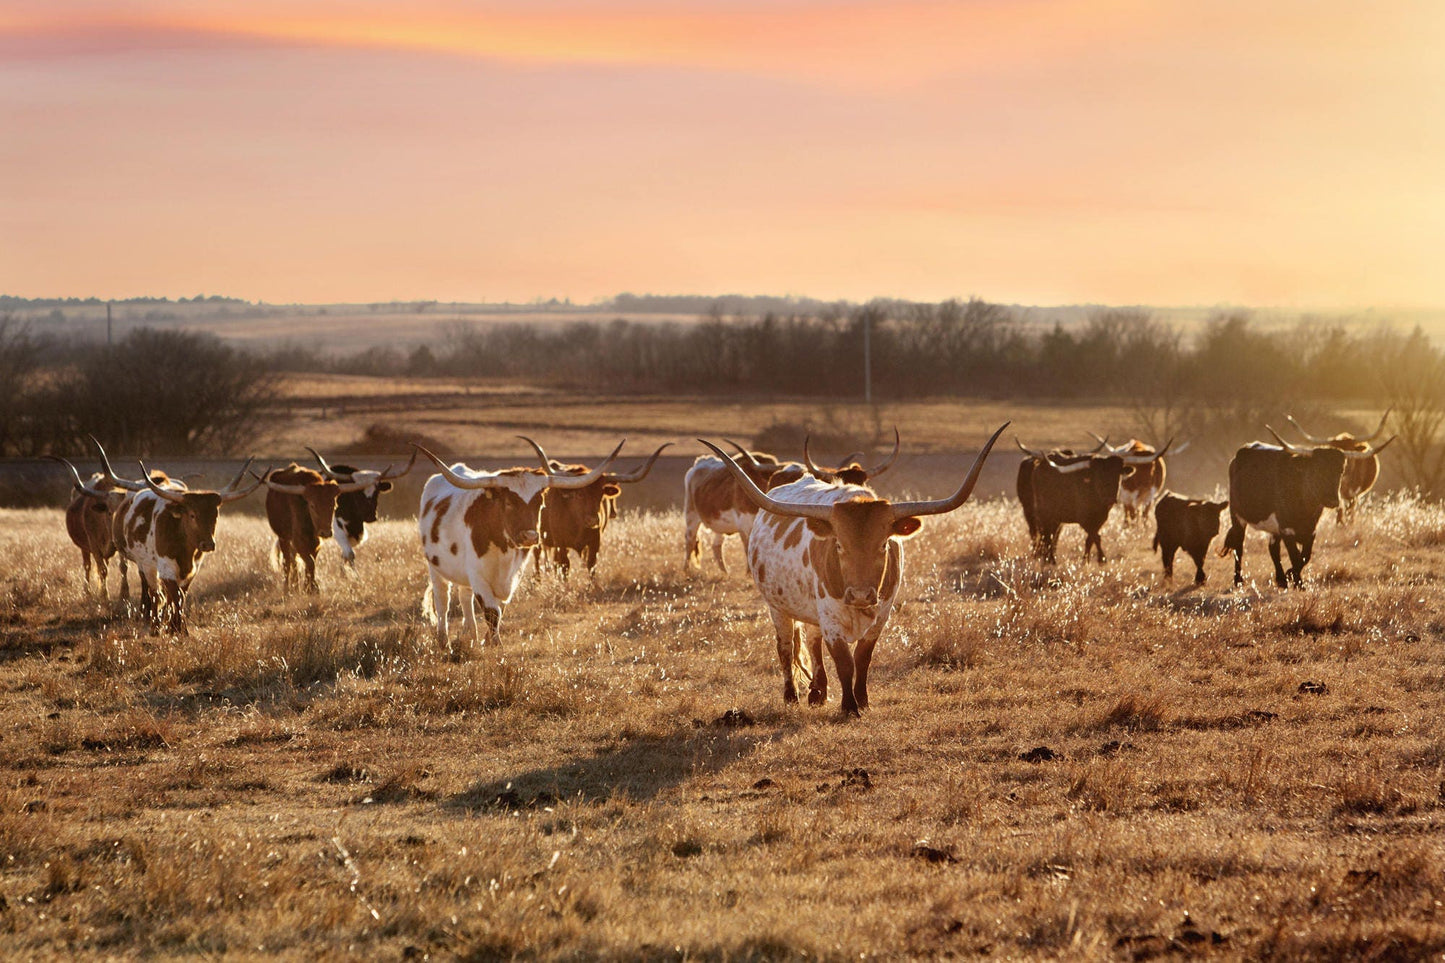 Texas Longhorn Cattle Herd at Sunset Paper Photo Print / 12 x 18 Inches Wall Art Teri James Photography